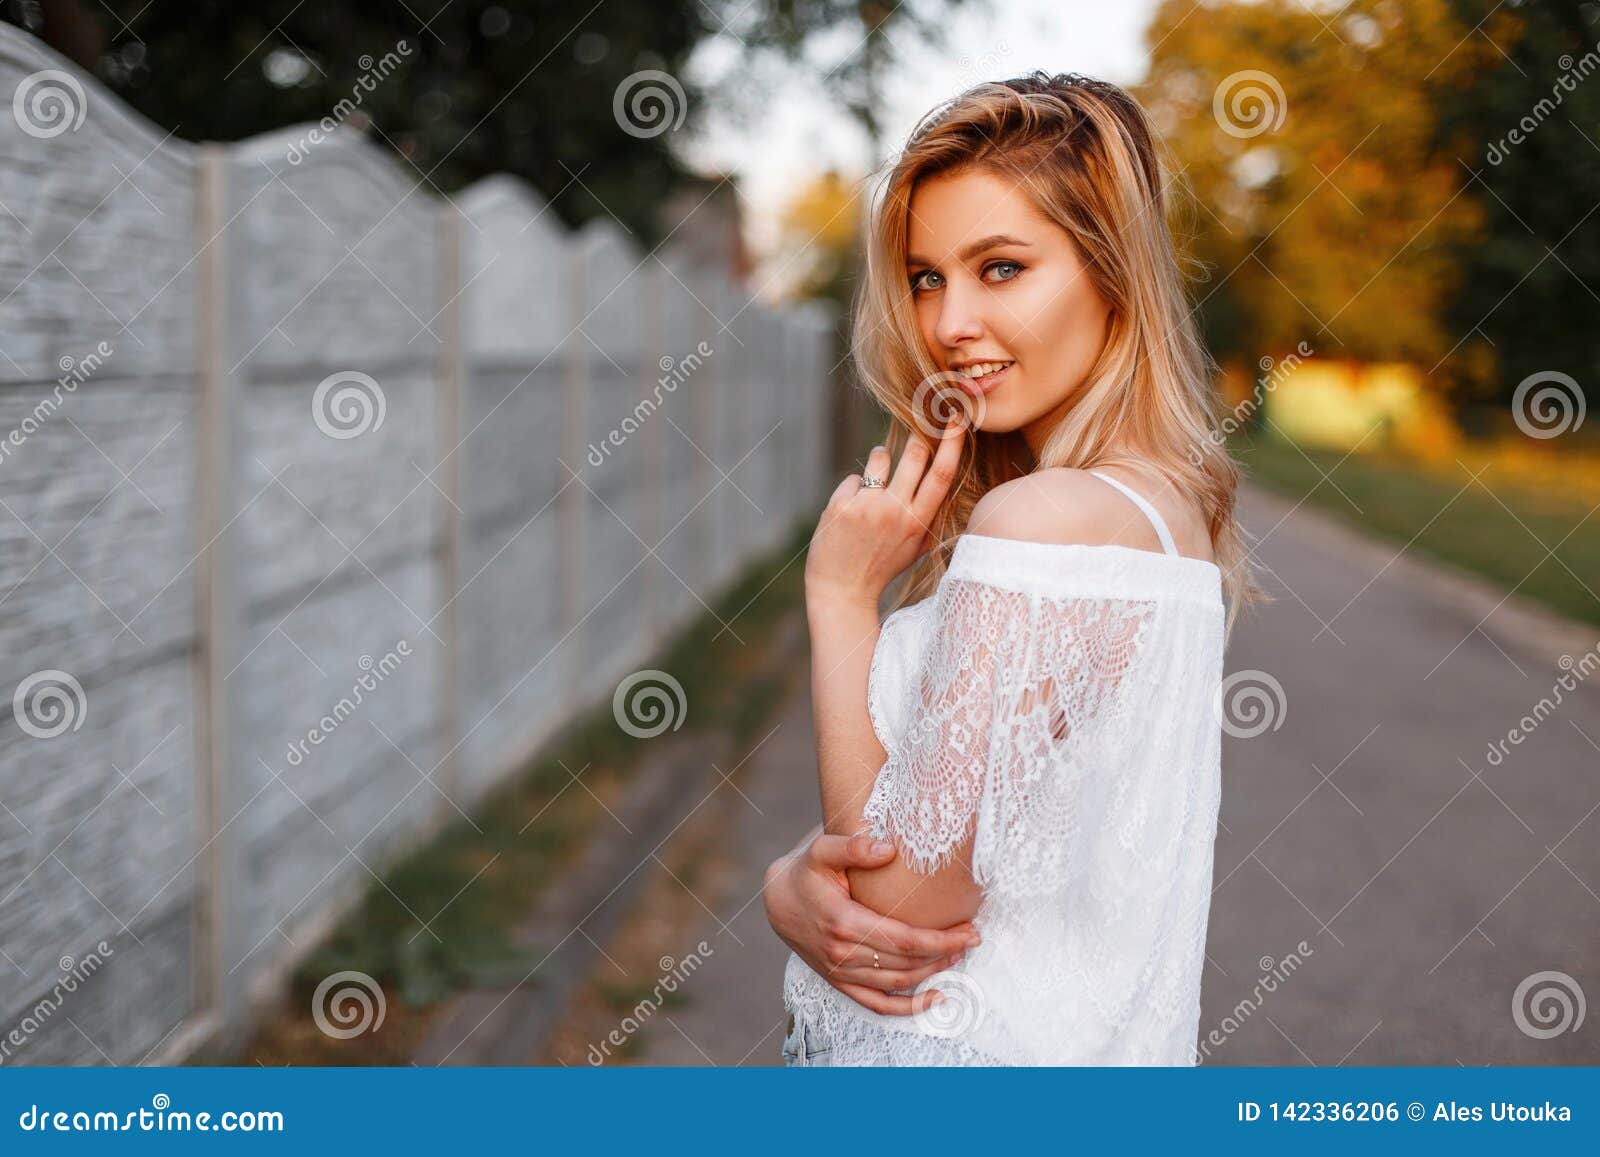 Positive Attractive Young Woman In An Elegant Lace Blouse Posing